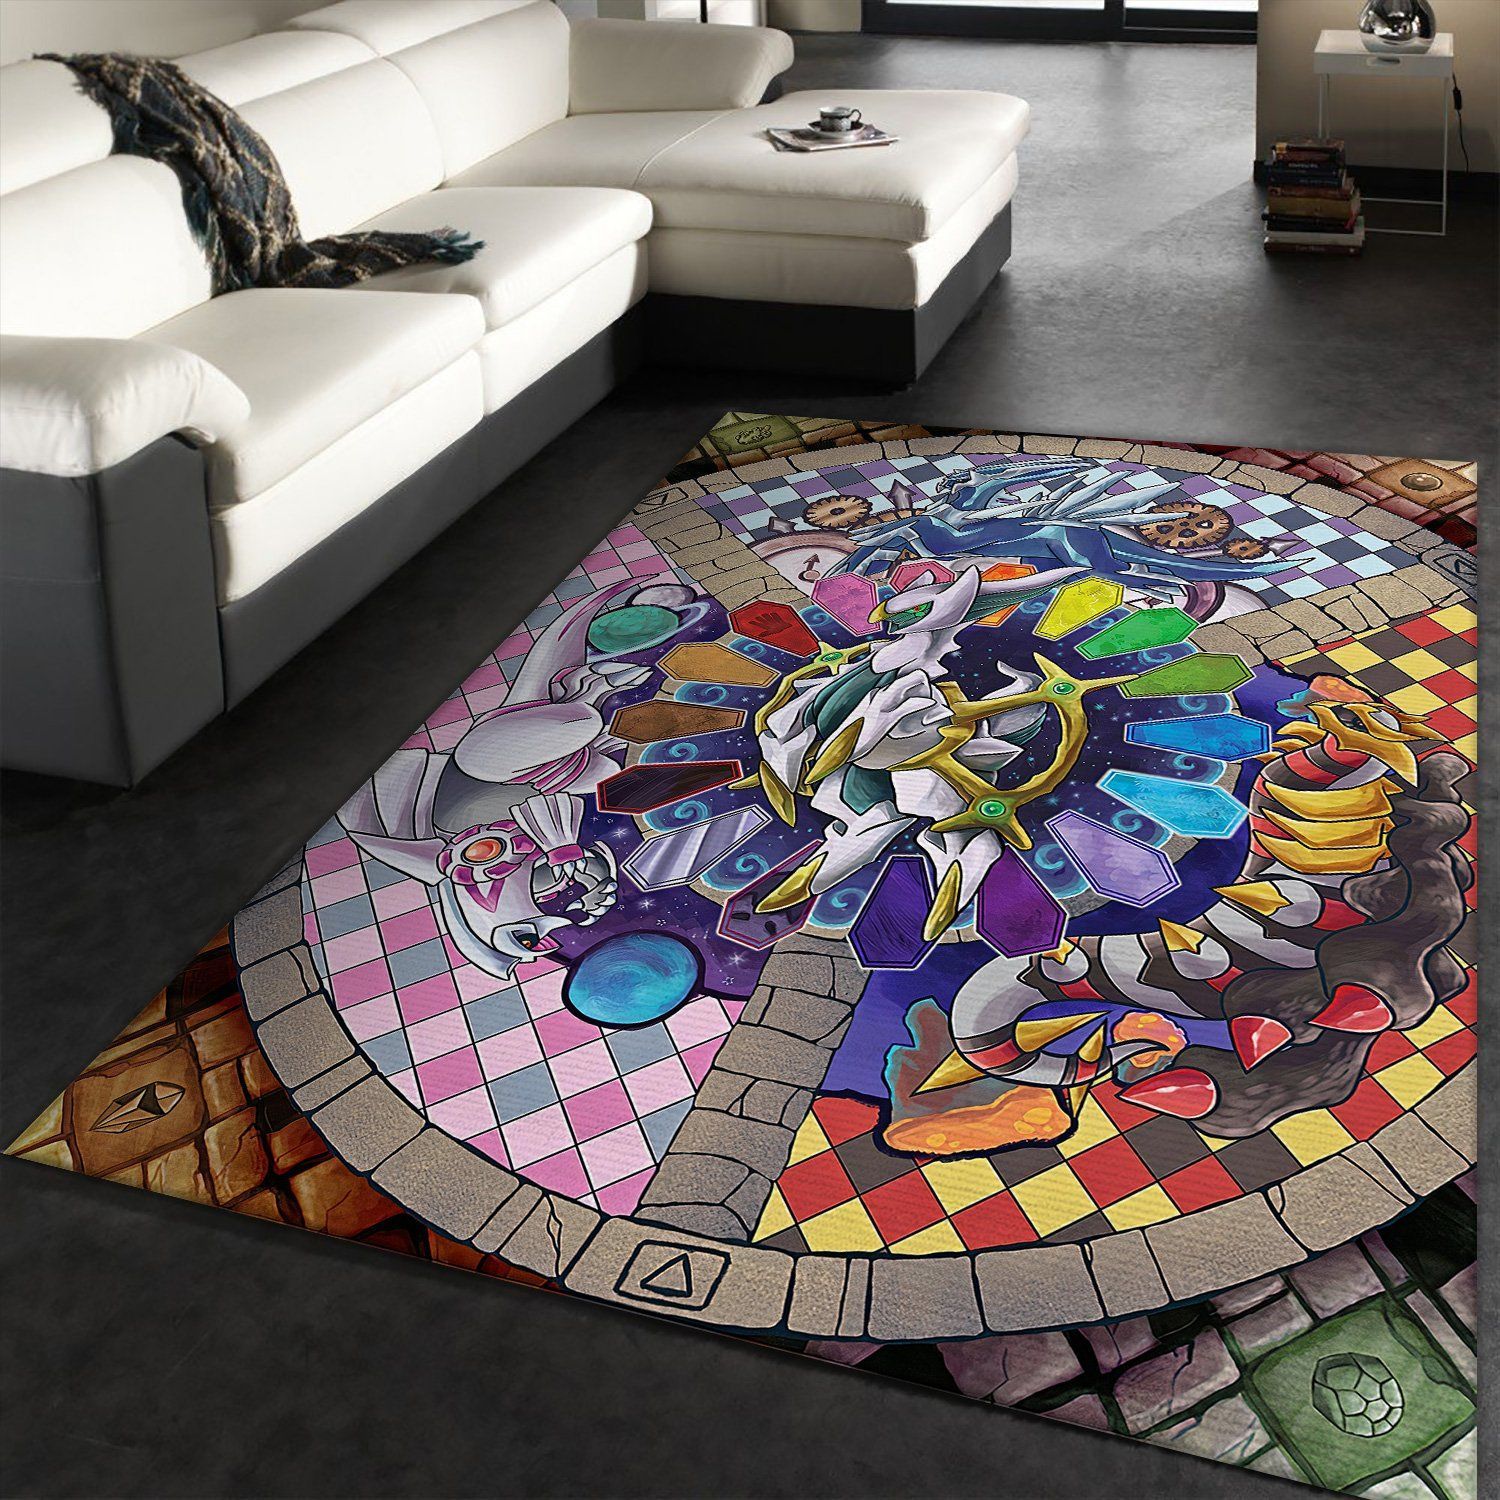 Add a Touch of Anime to Your Home with Our Exclusive Anime Rug Collection   rug4nerd